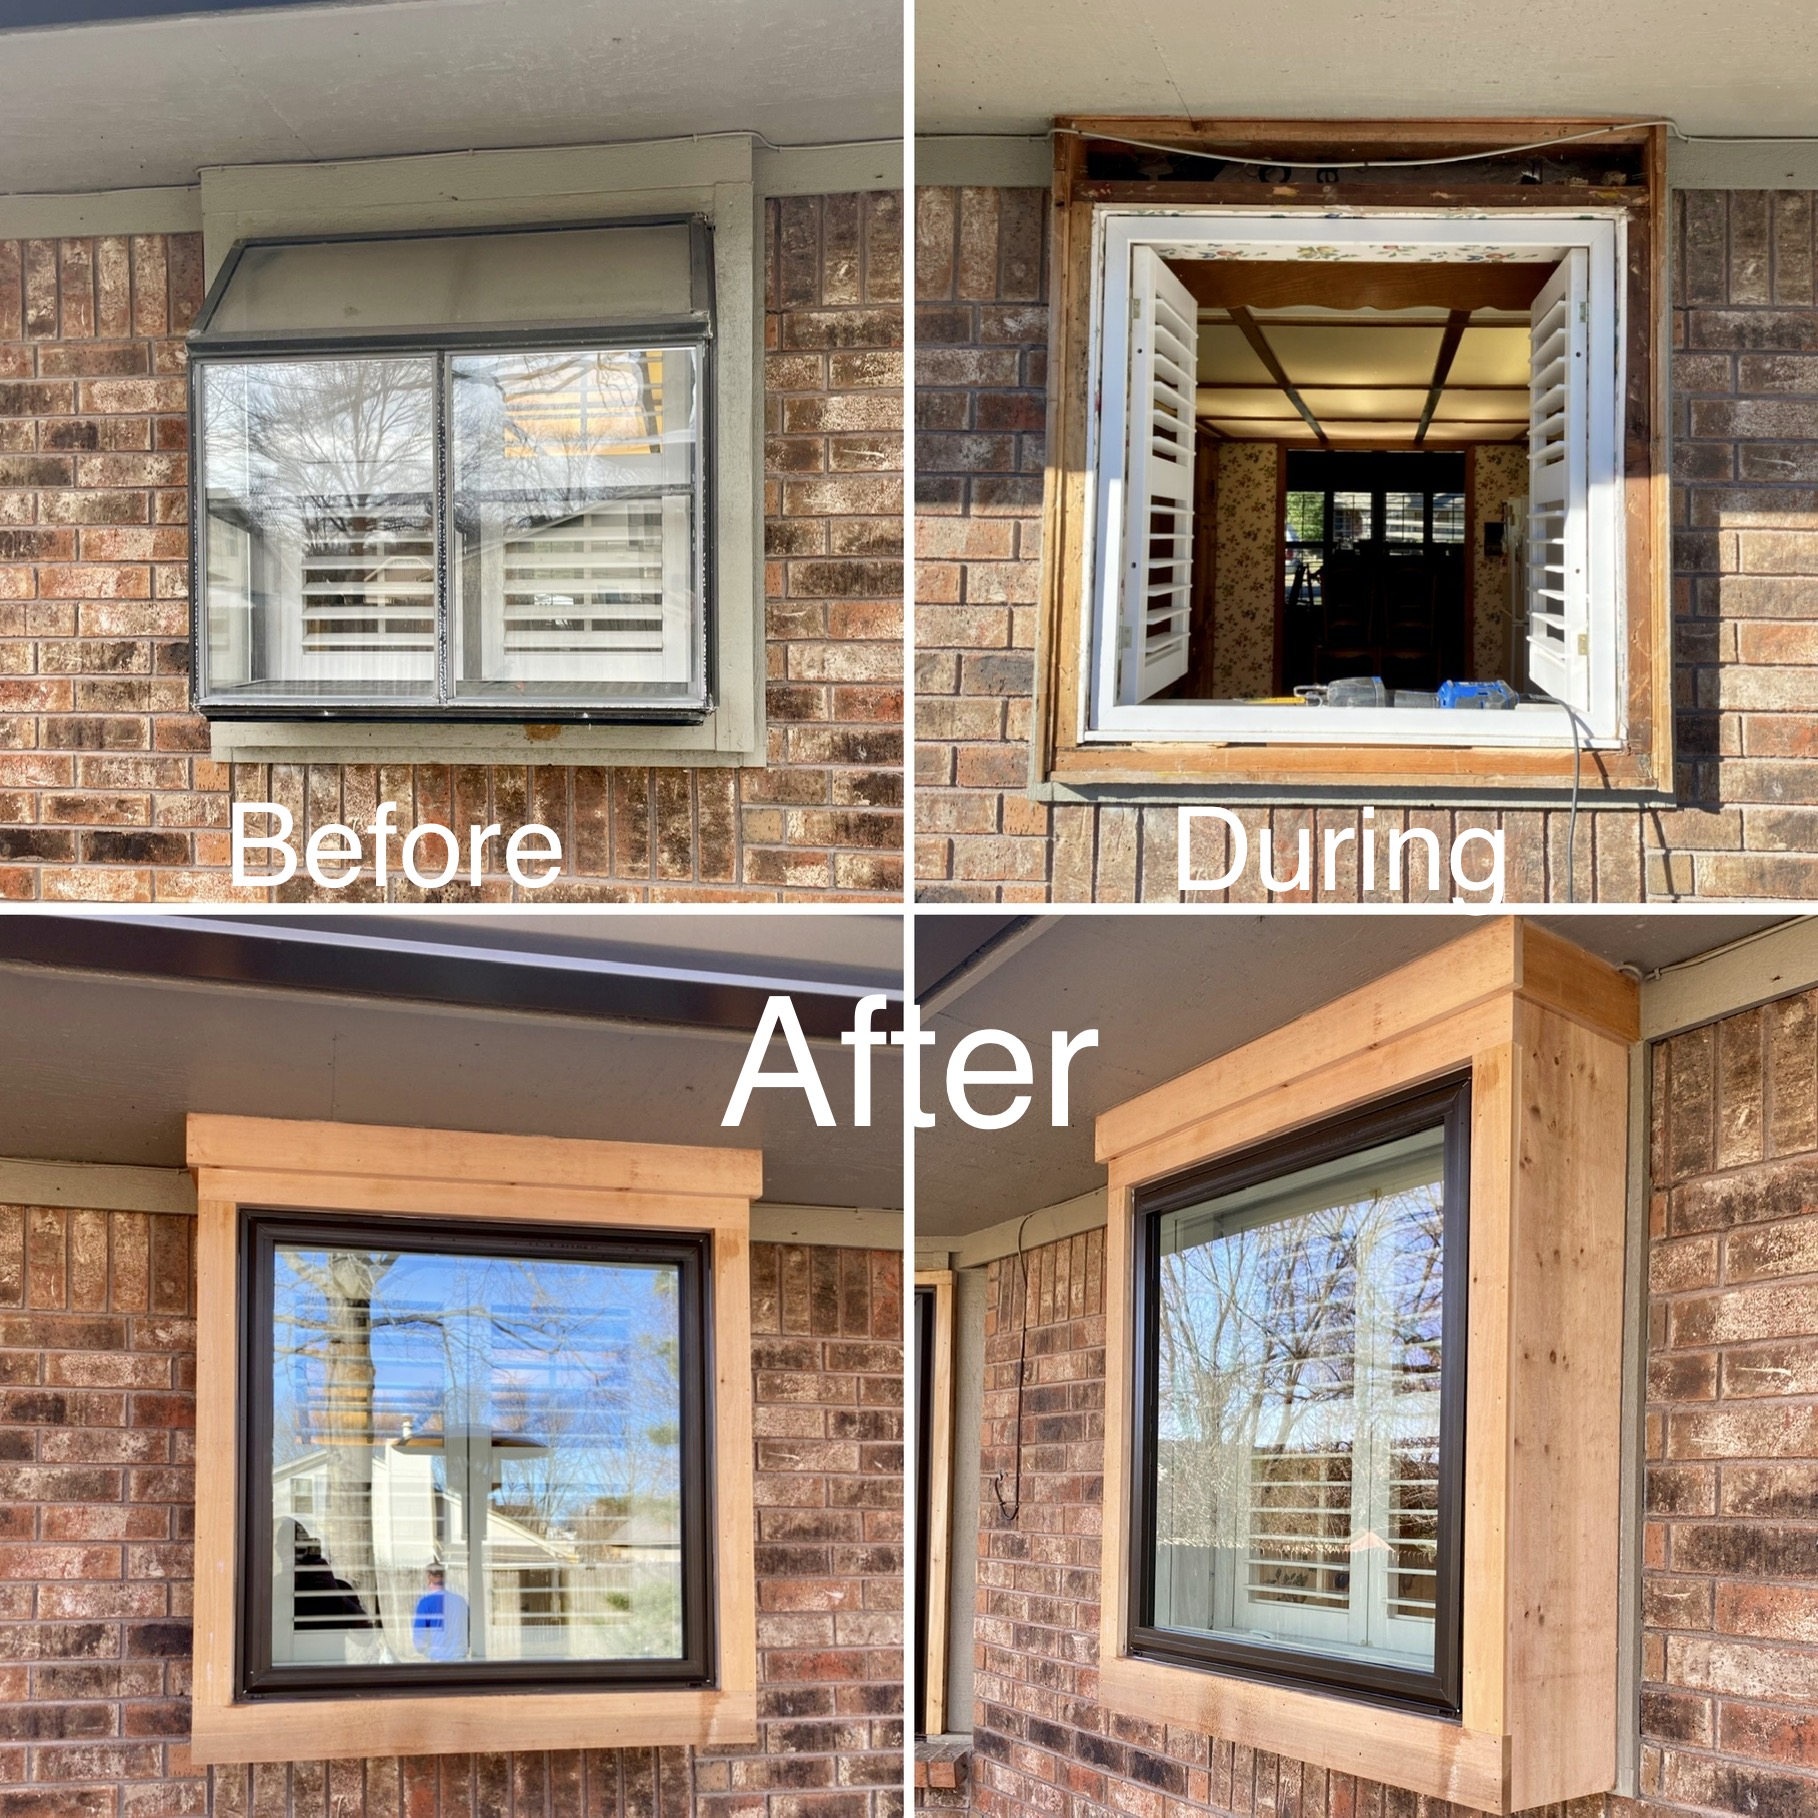 Conroe Window Replacement